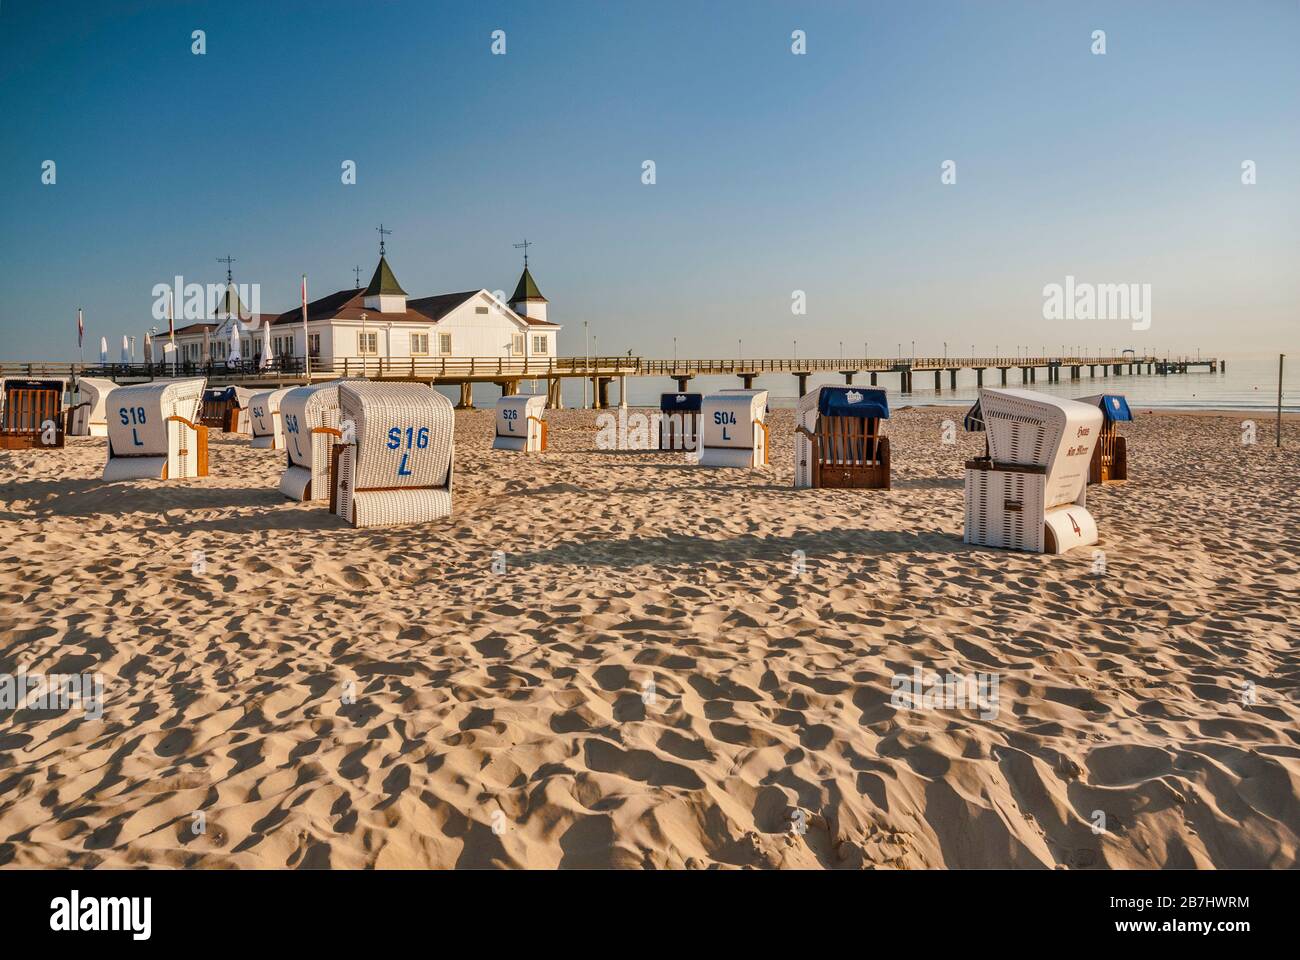 Wicker beach chairs and Seebrücke pier in Ahlbeck at Usedom Island in Mecklenburg-West Pomerania, Germany Stock Photo